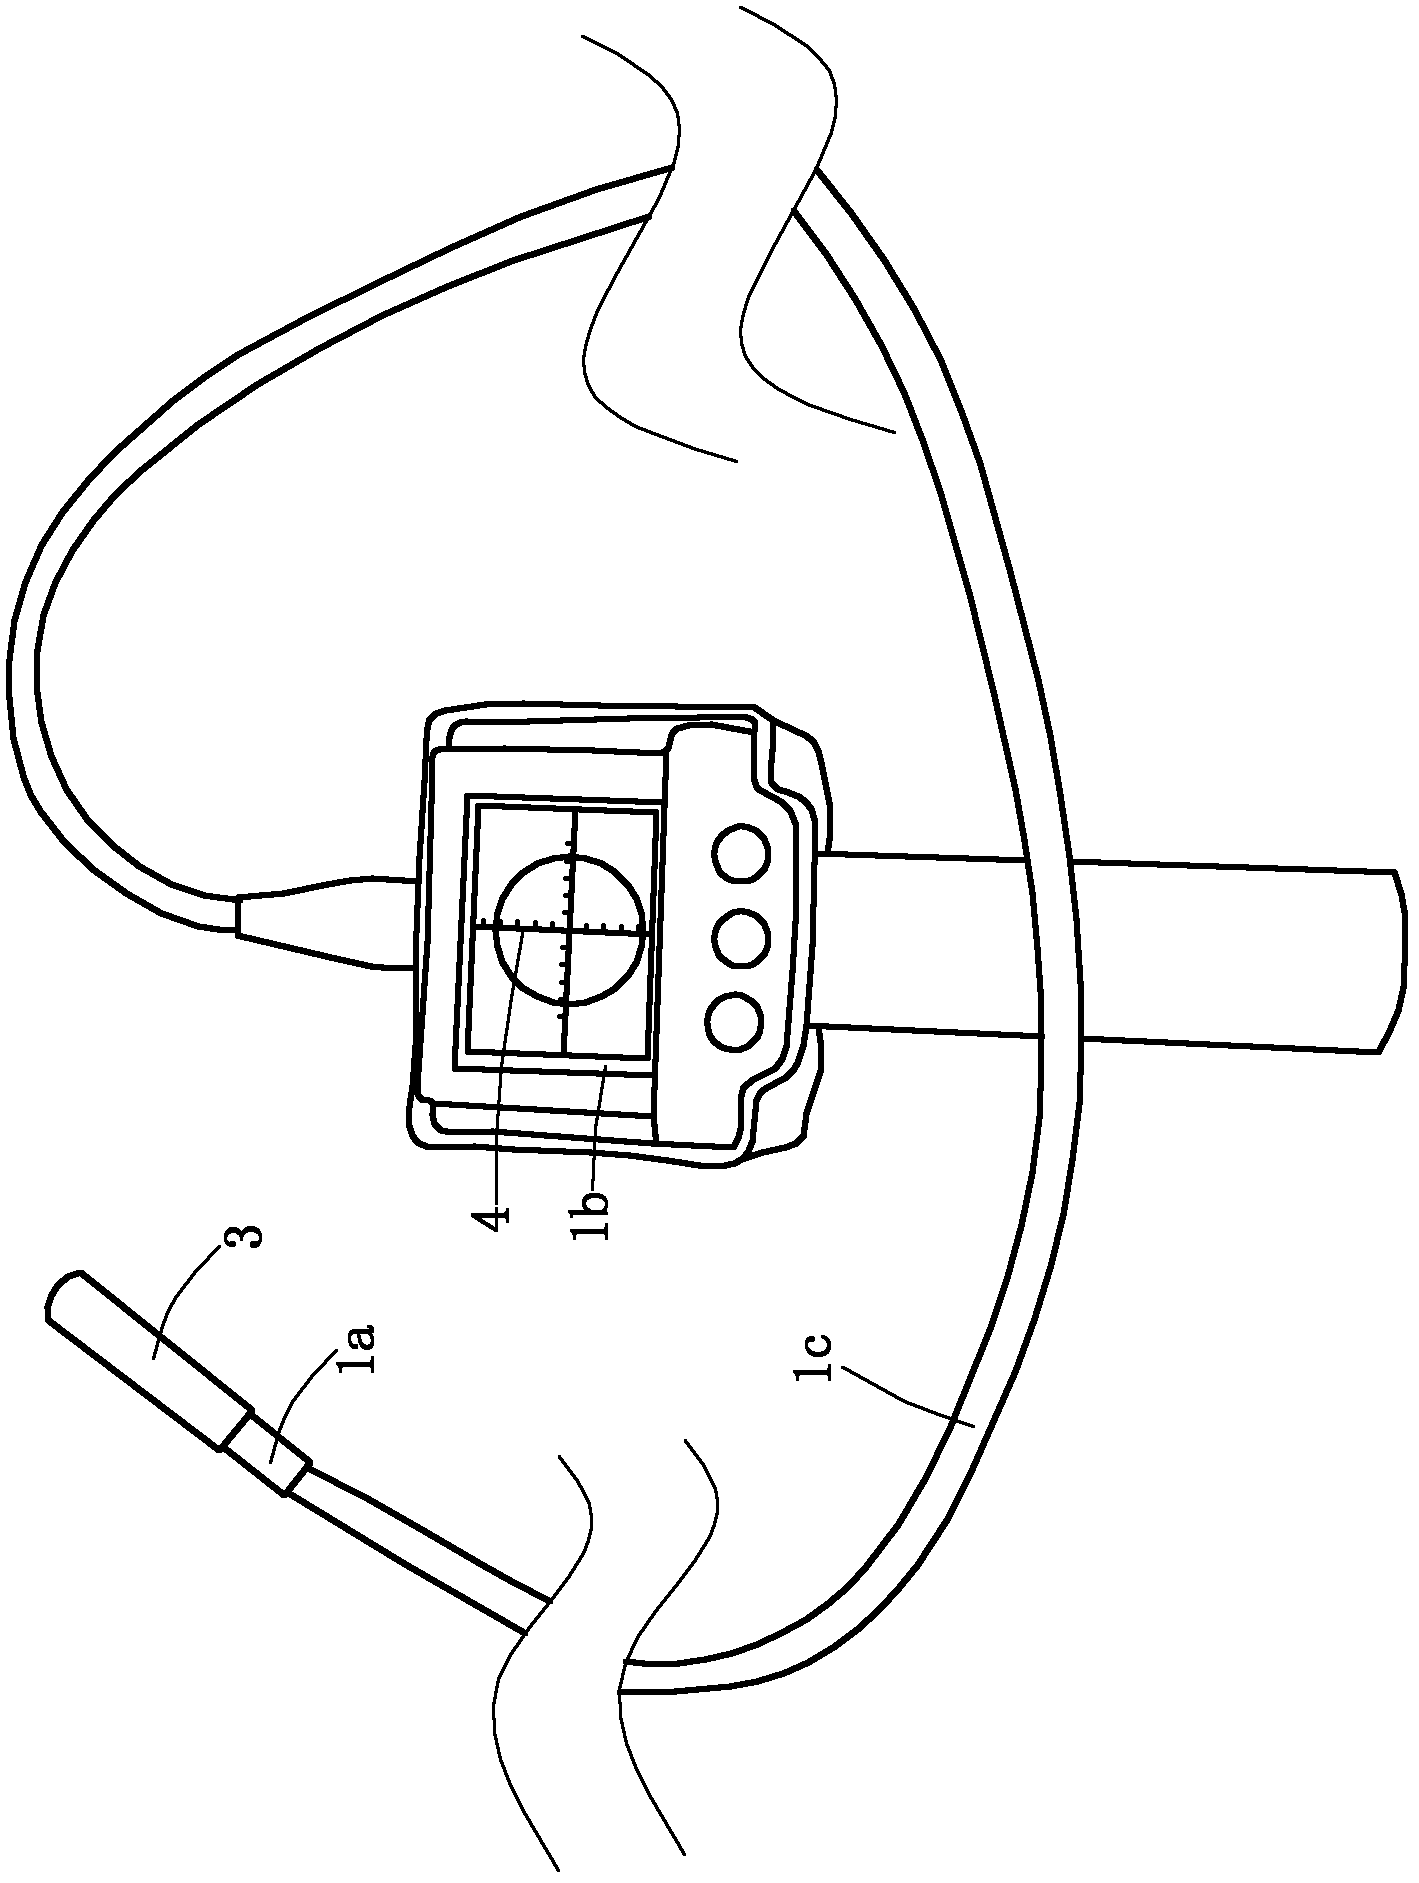 Device for examining size of cervical opening